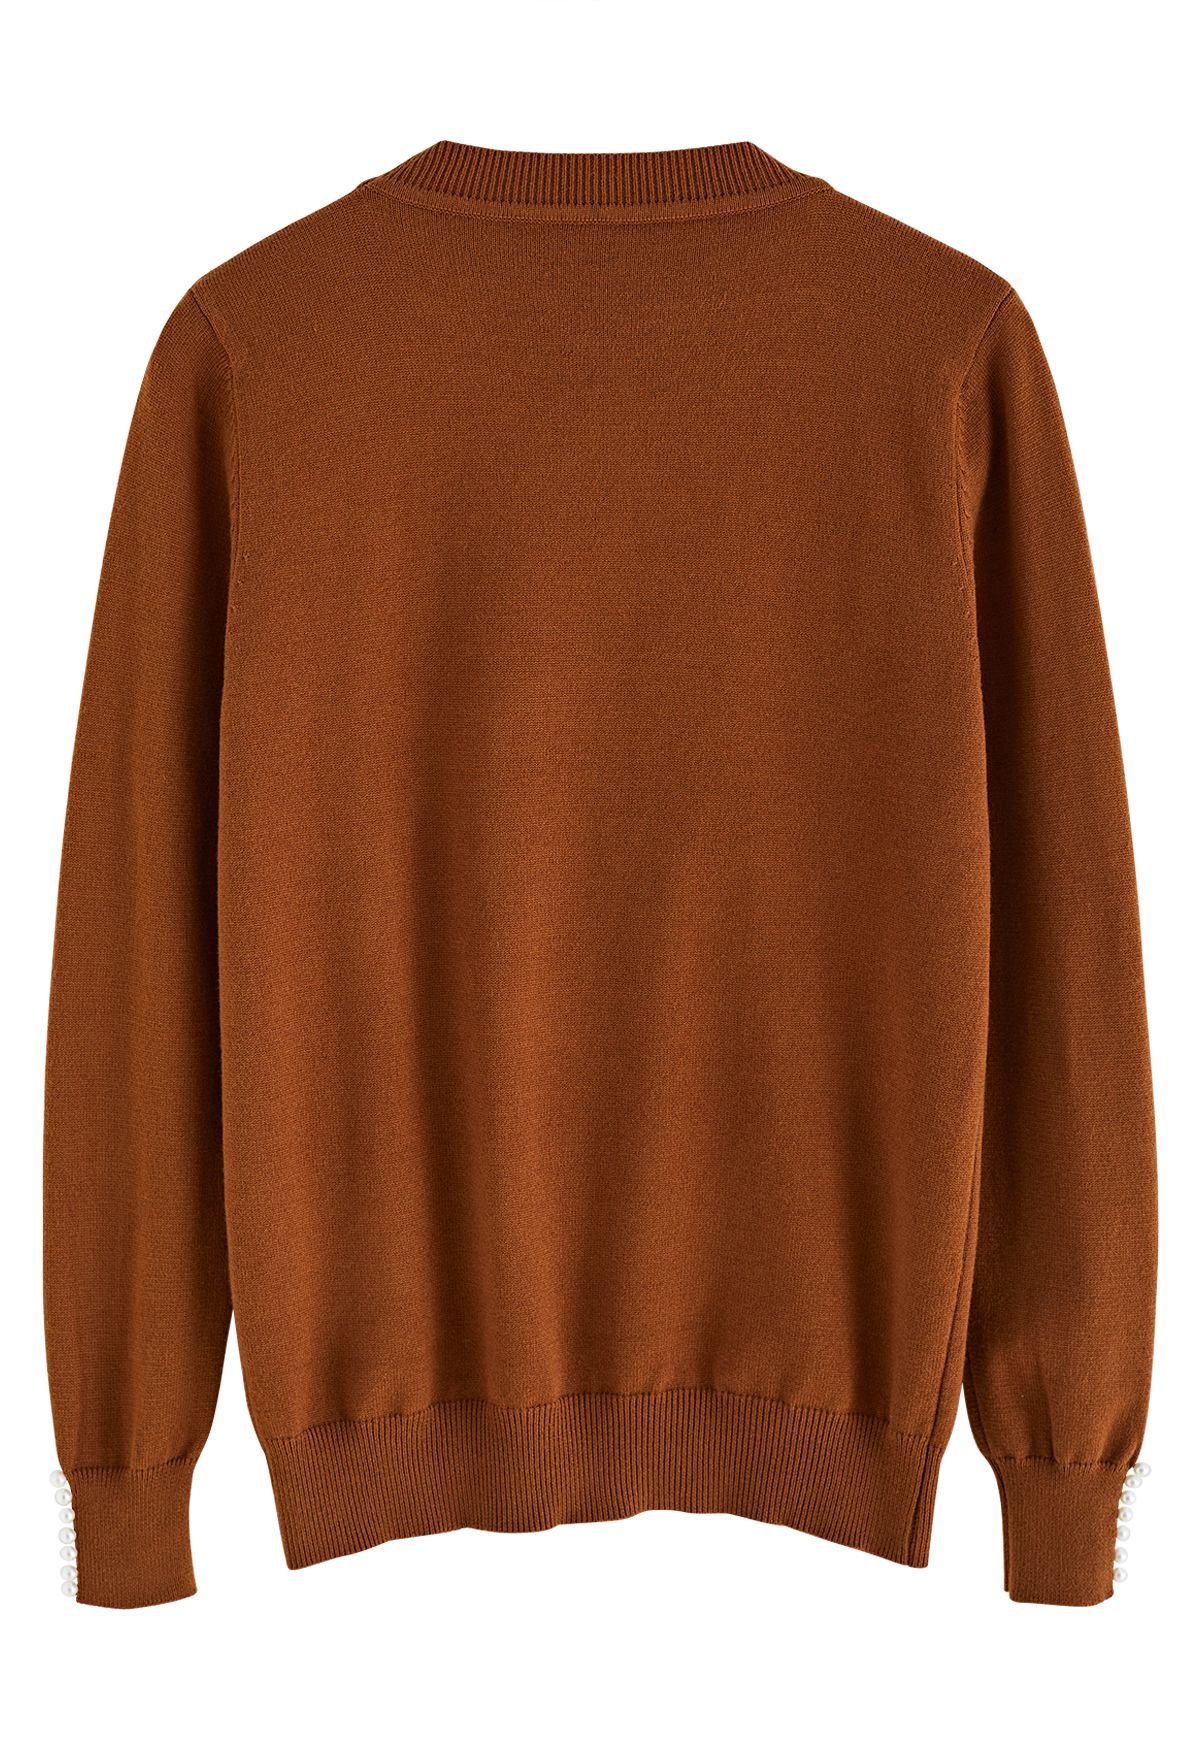 Pearl Trimmed Soft Knit Top in Caramel